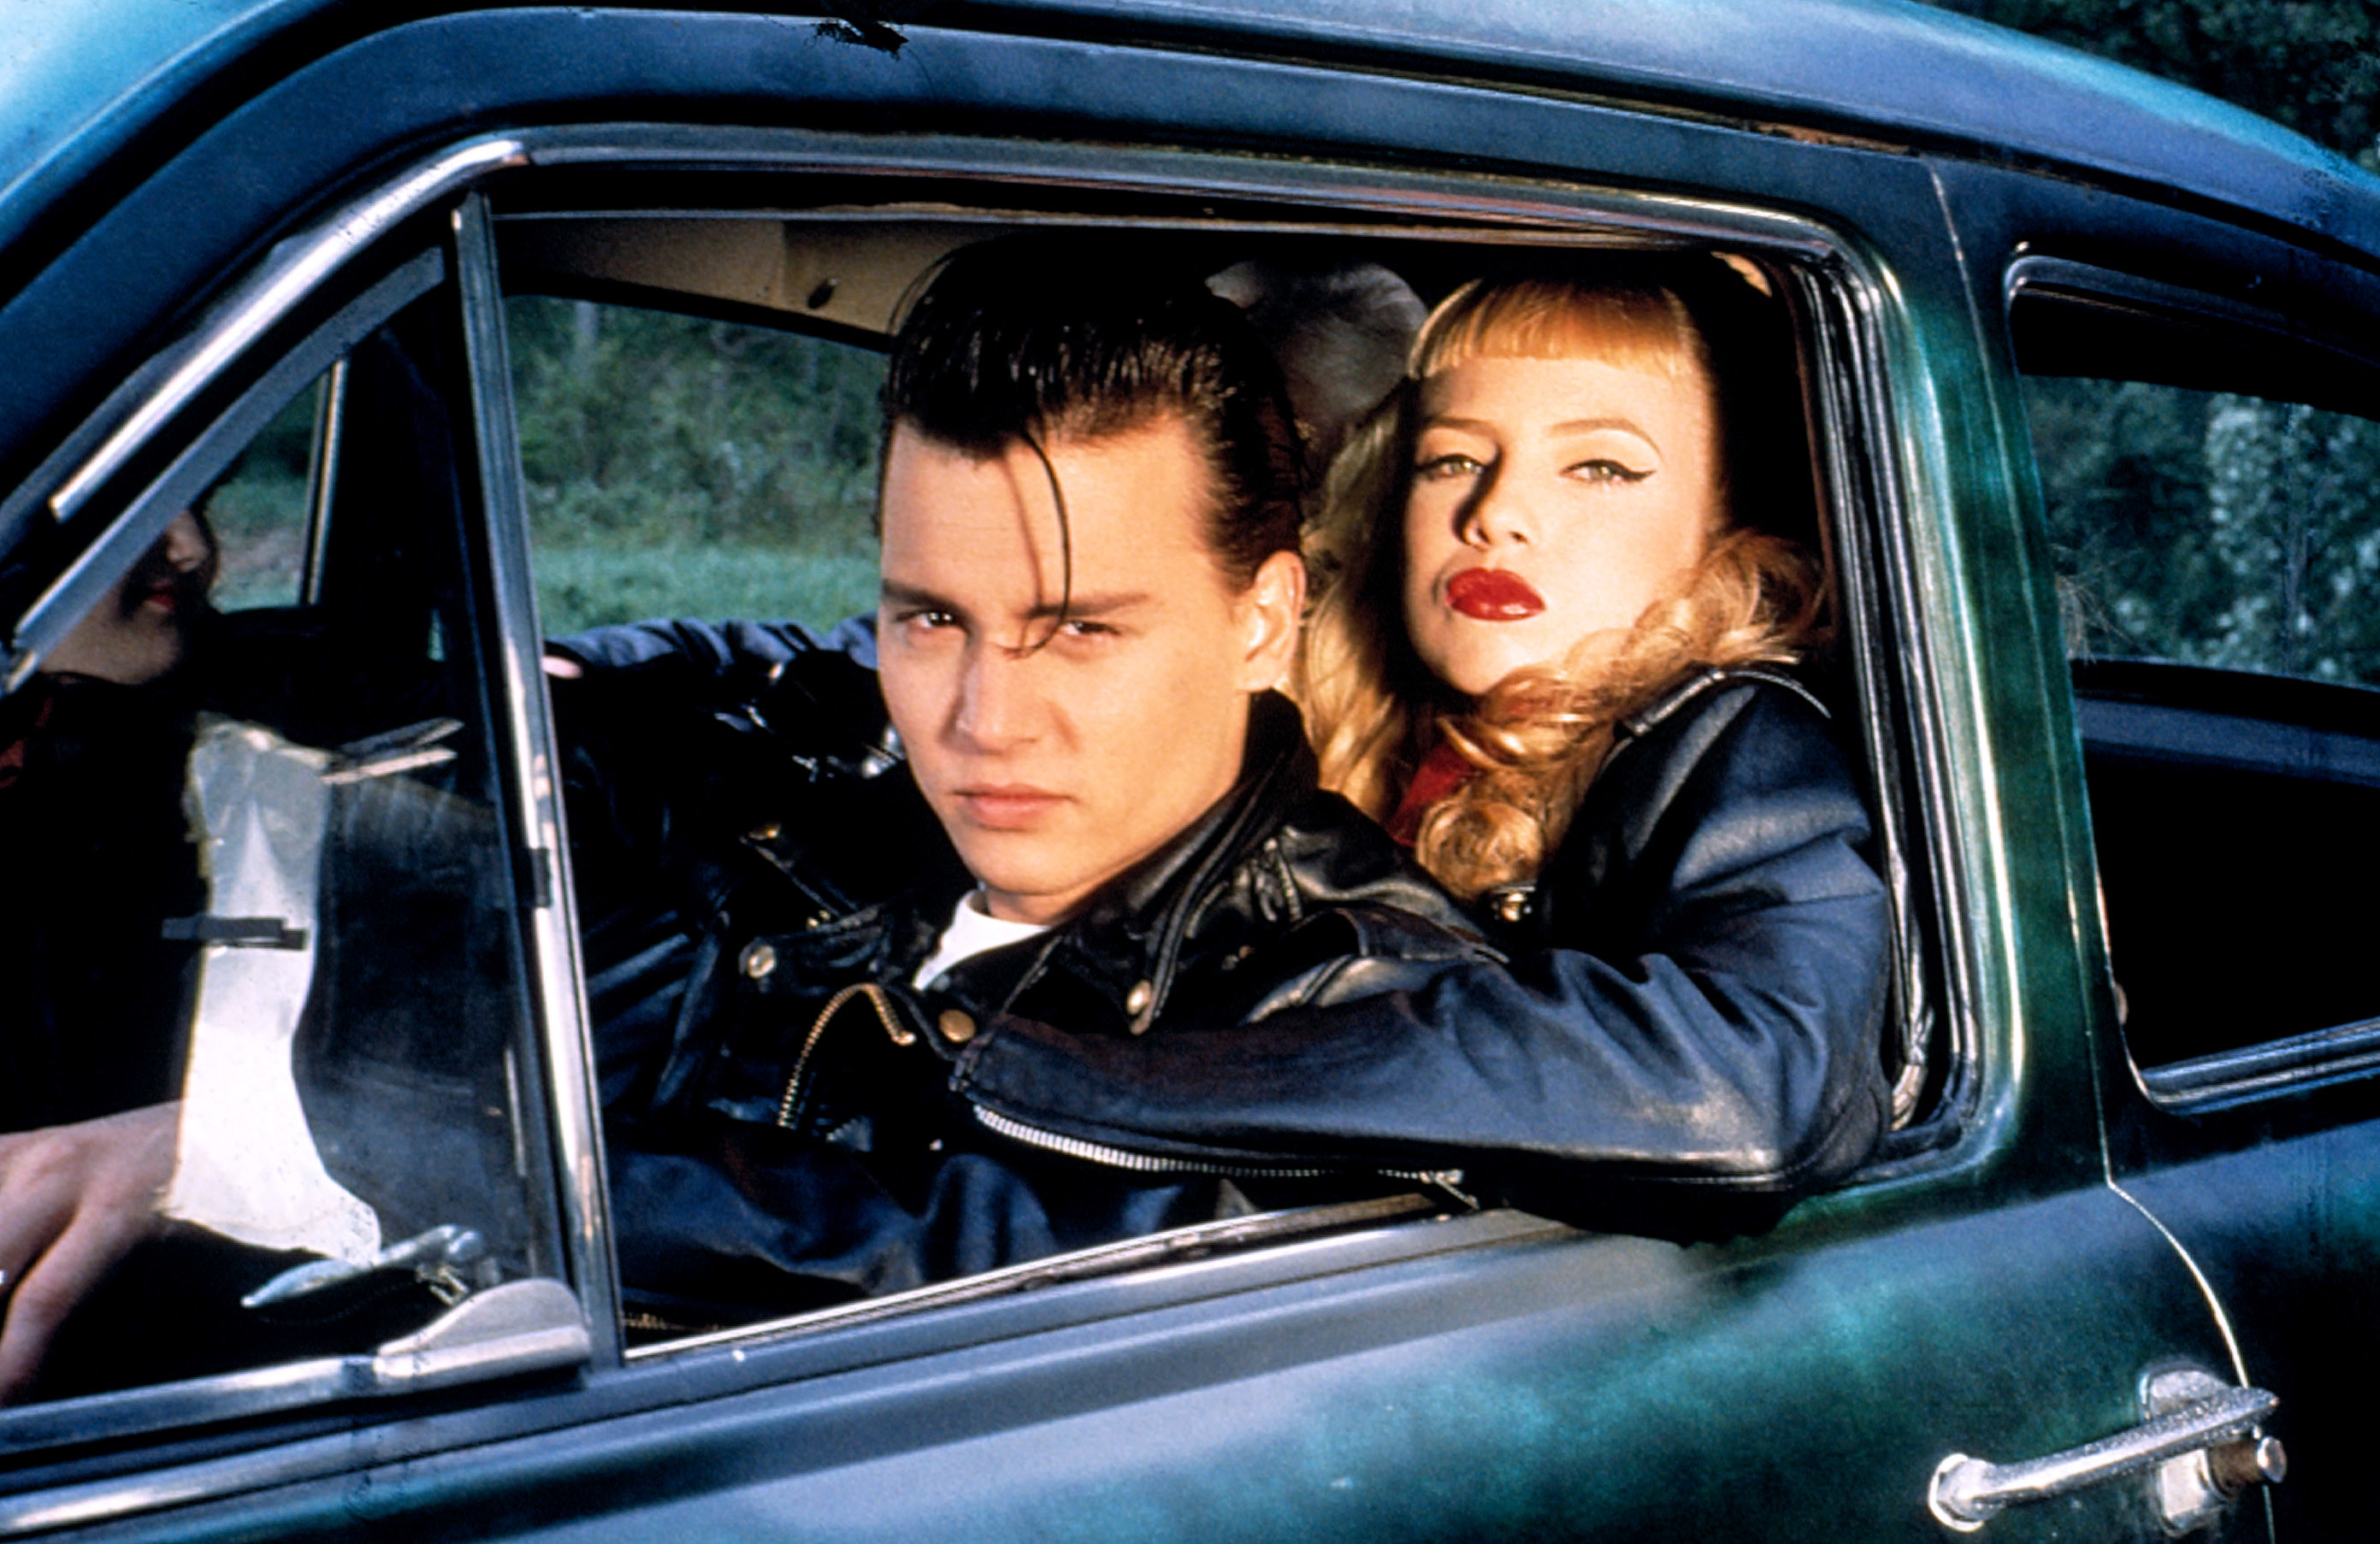 Johnny Depp and Traci Lords in &#x27;Cry-Baby,&#x27; dressed in 50s style, sitting in a vintage car